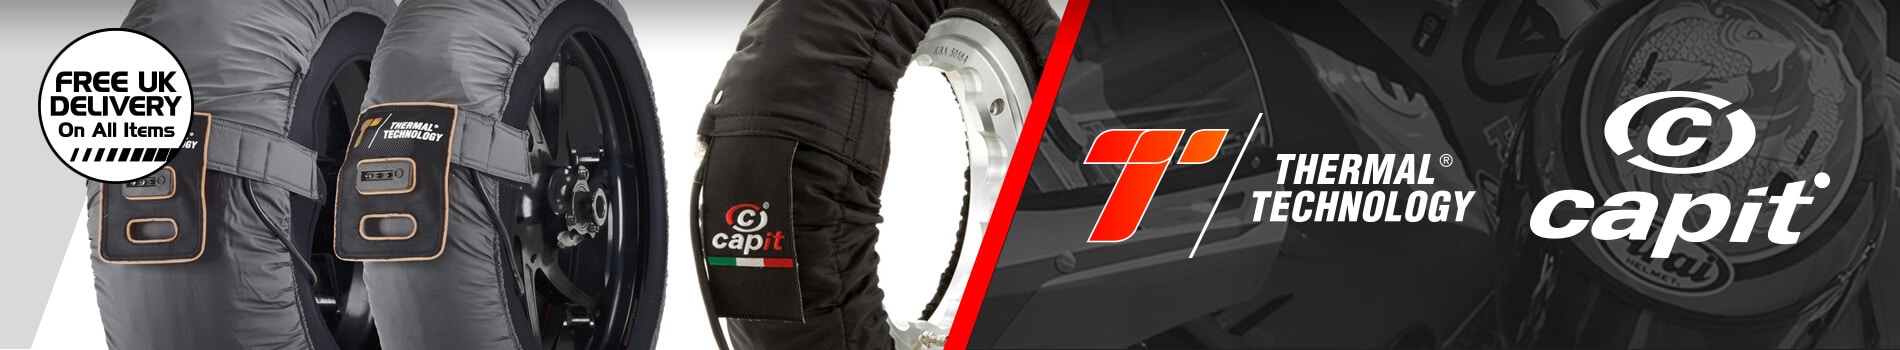 Tyre Warmers - Free UK Delivery